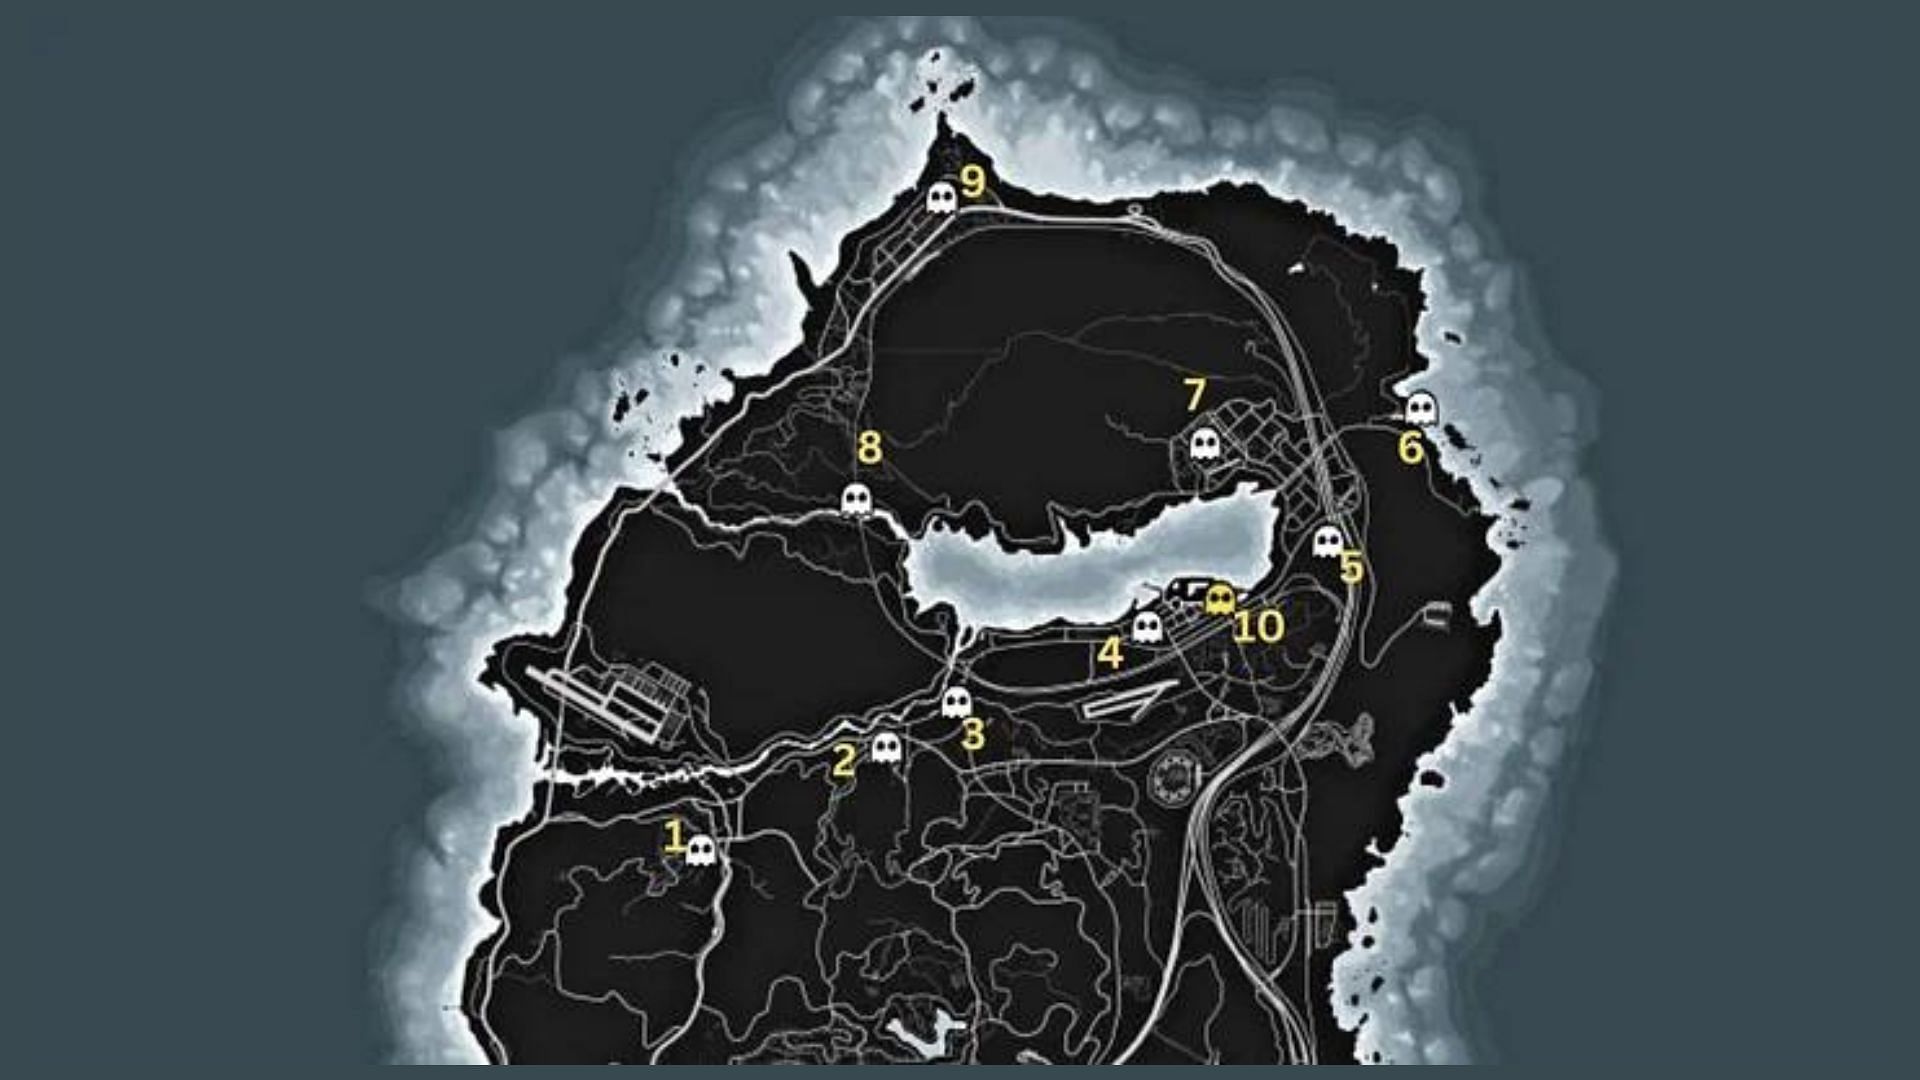 A map overview of possible ghost spawn locations in the game (Image via gtalens.com)